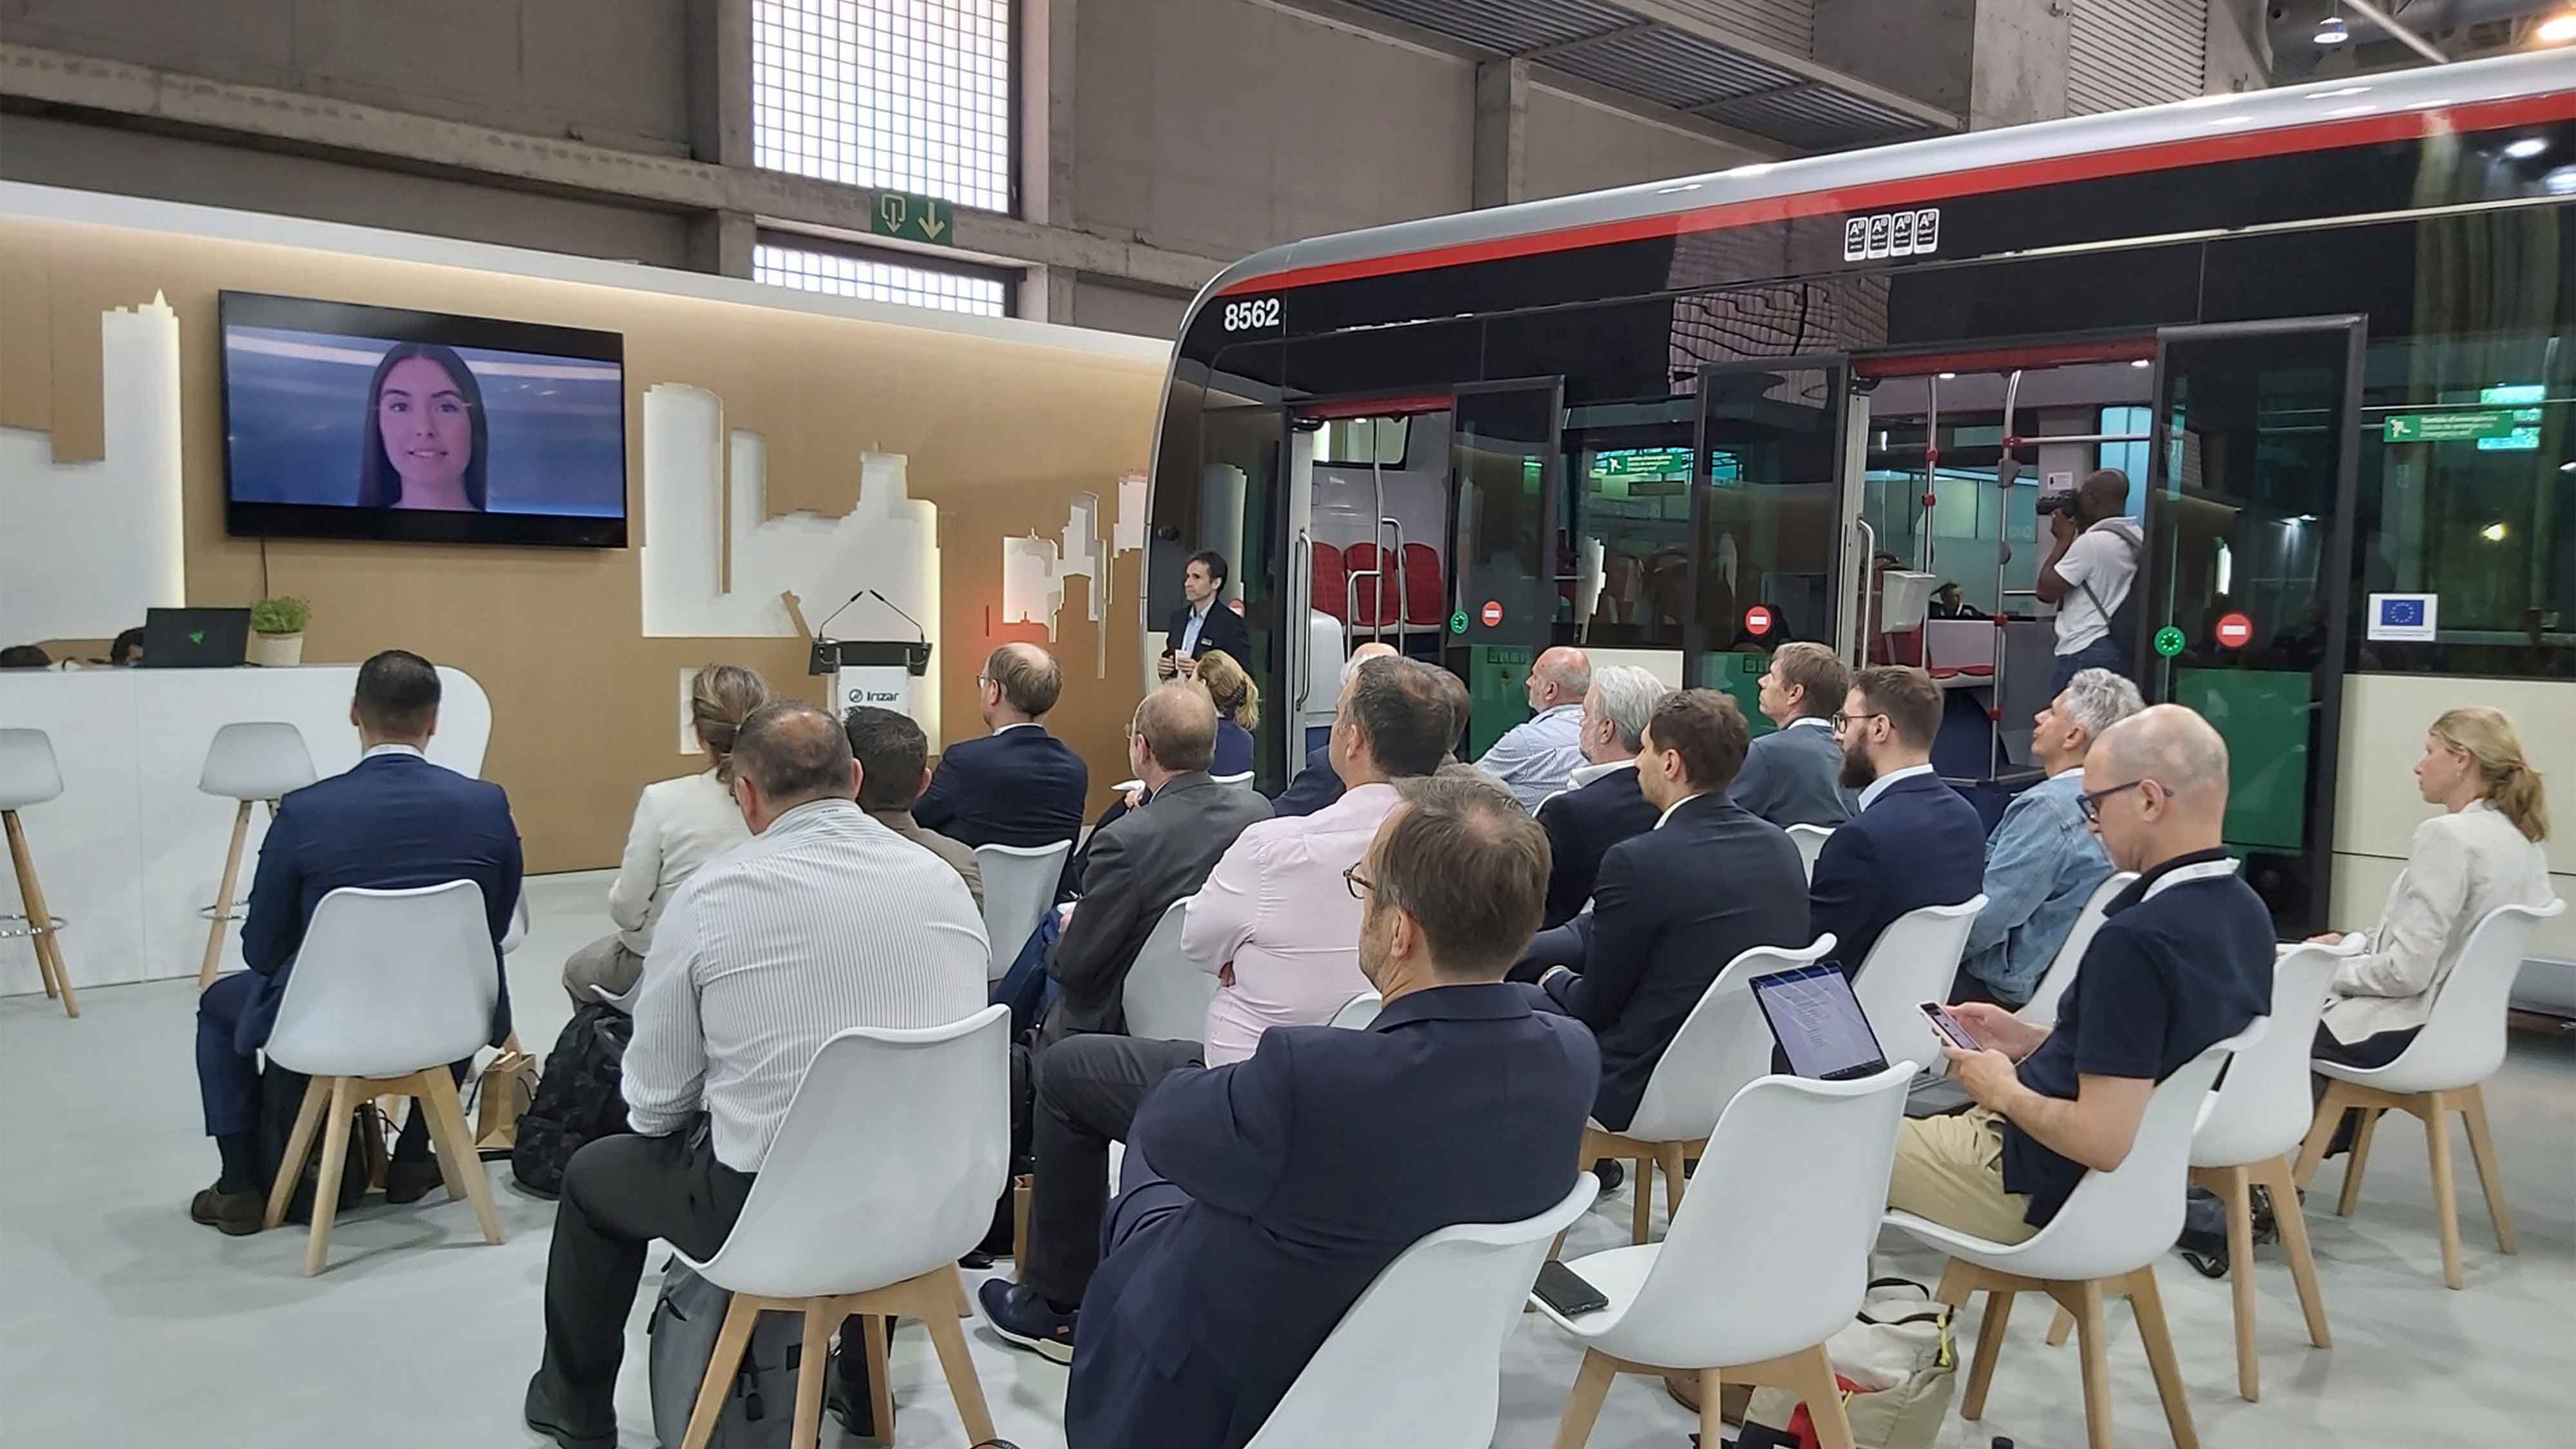 Irizar e-mobility is attending the UITP Global Public Transport Summit in Barcelona